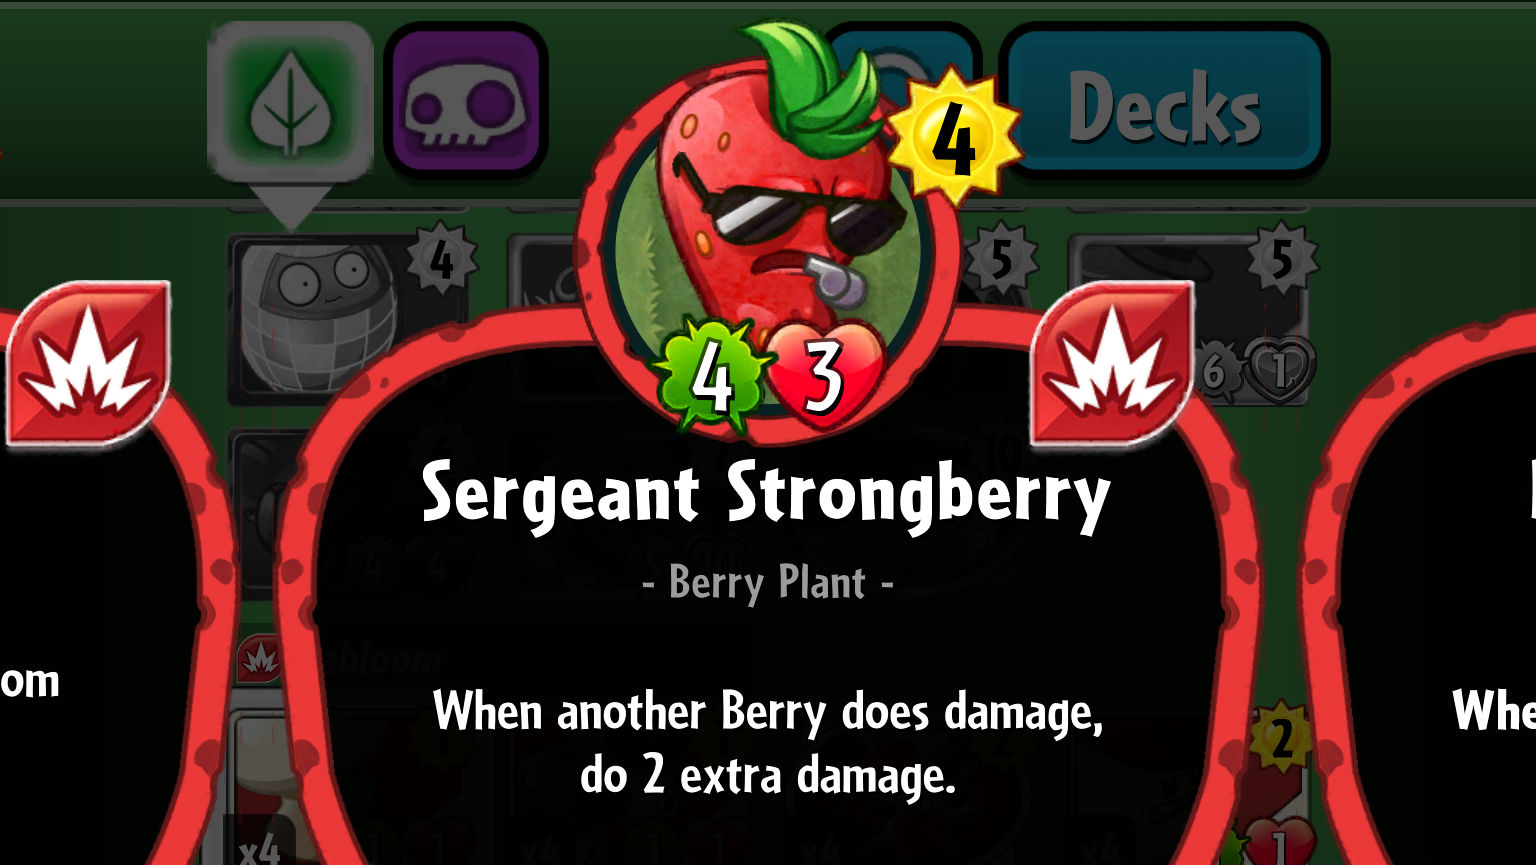 Plants vs. Zombies Heroes Sergeant Strongberry